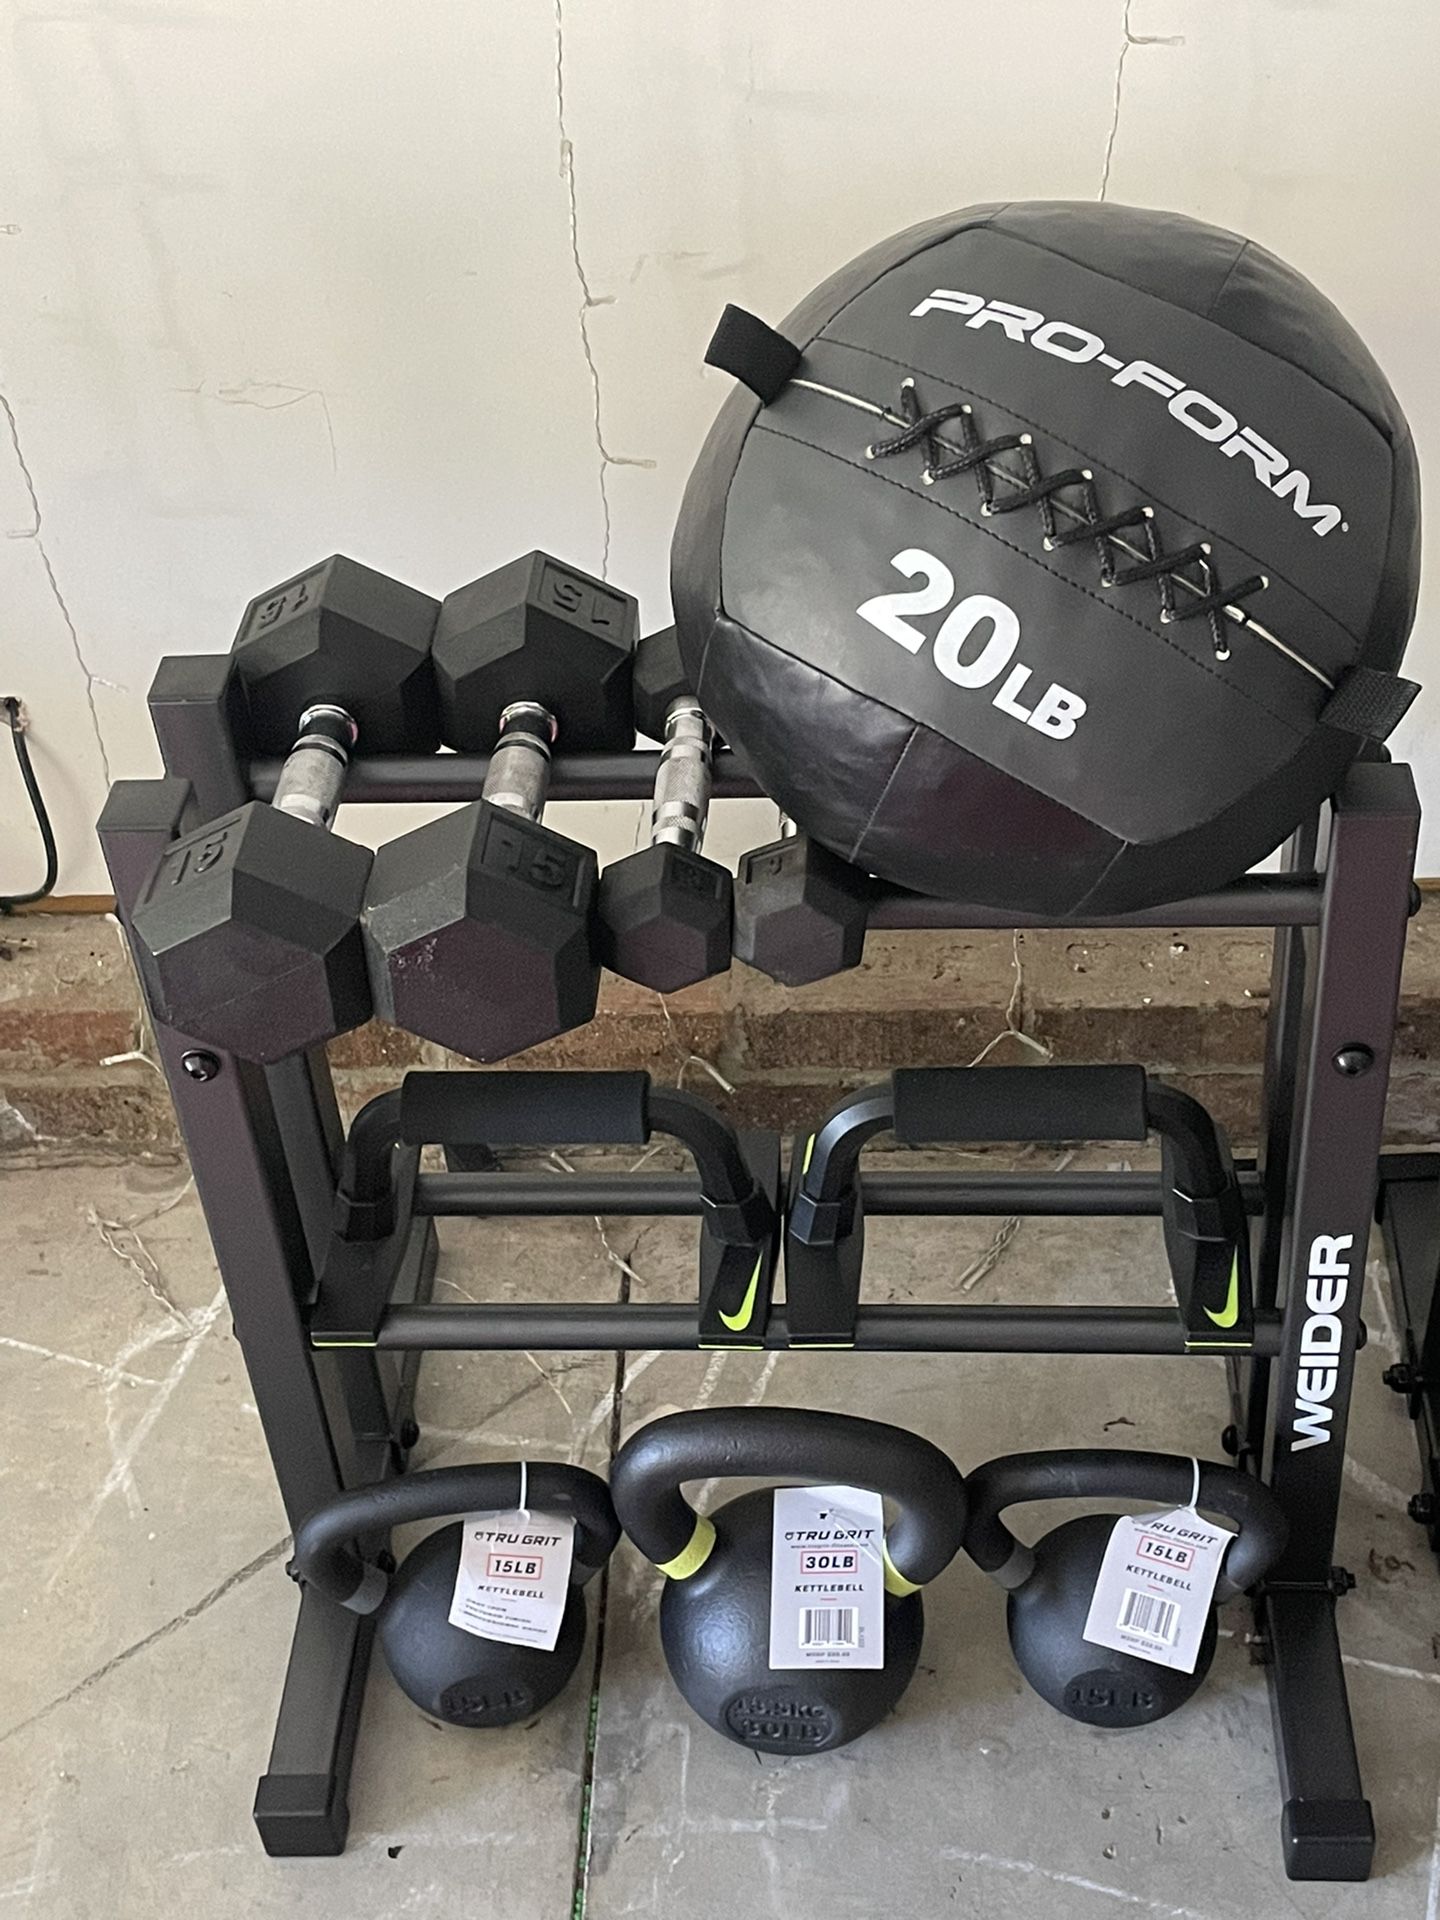 Dumbbells  Kettle Bells  Weight Ball Weight Rack And  Nike Push Up Grips All For $225